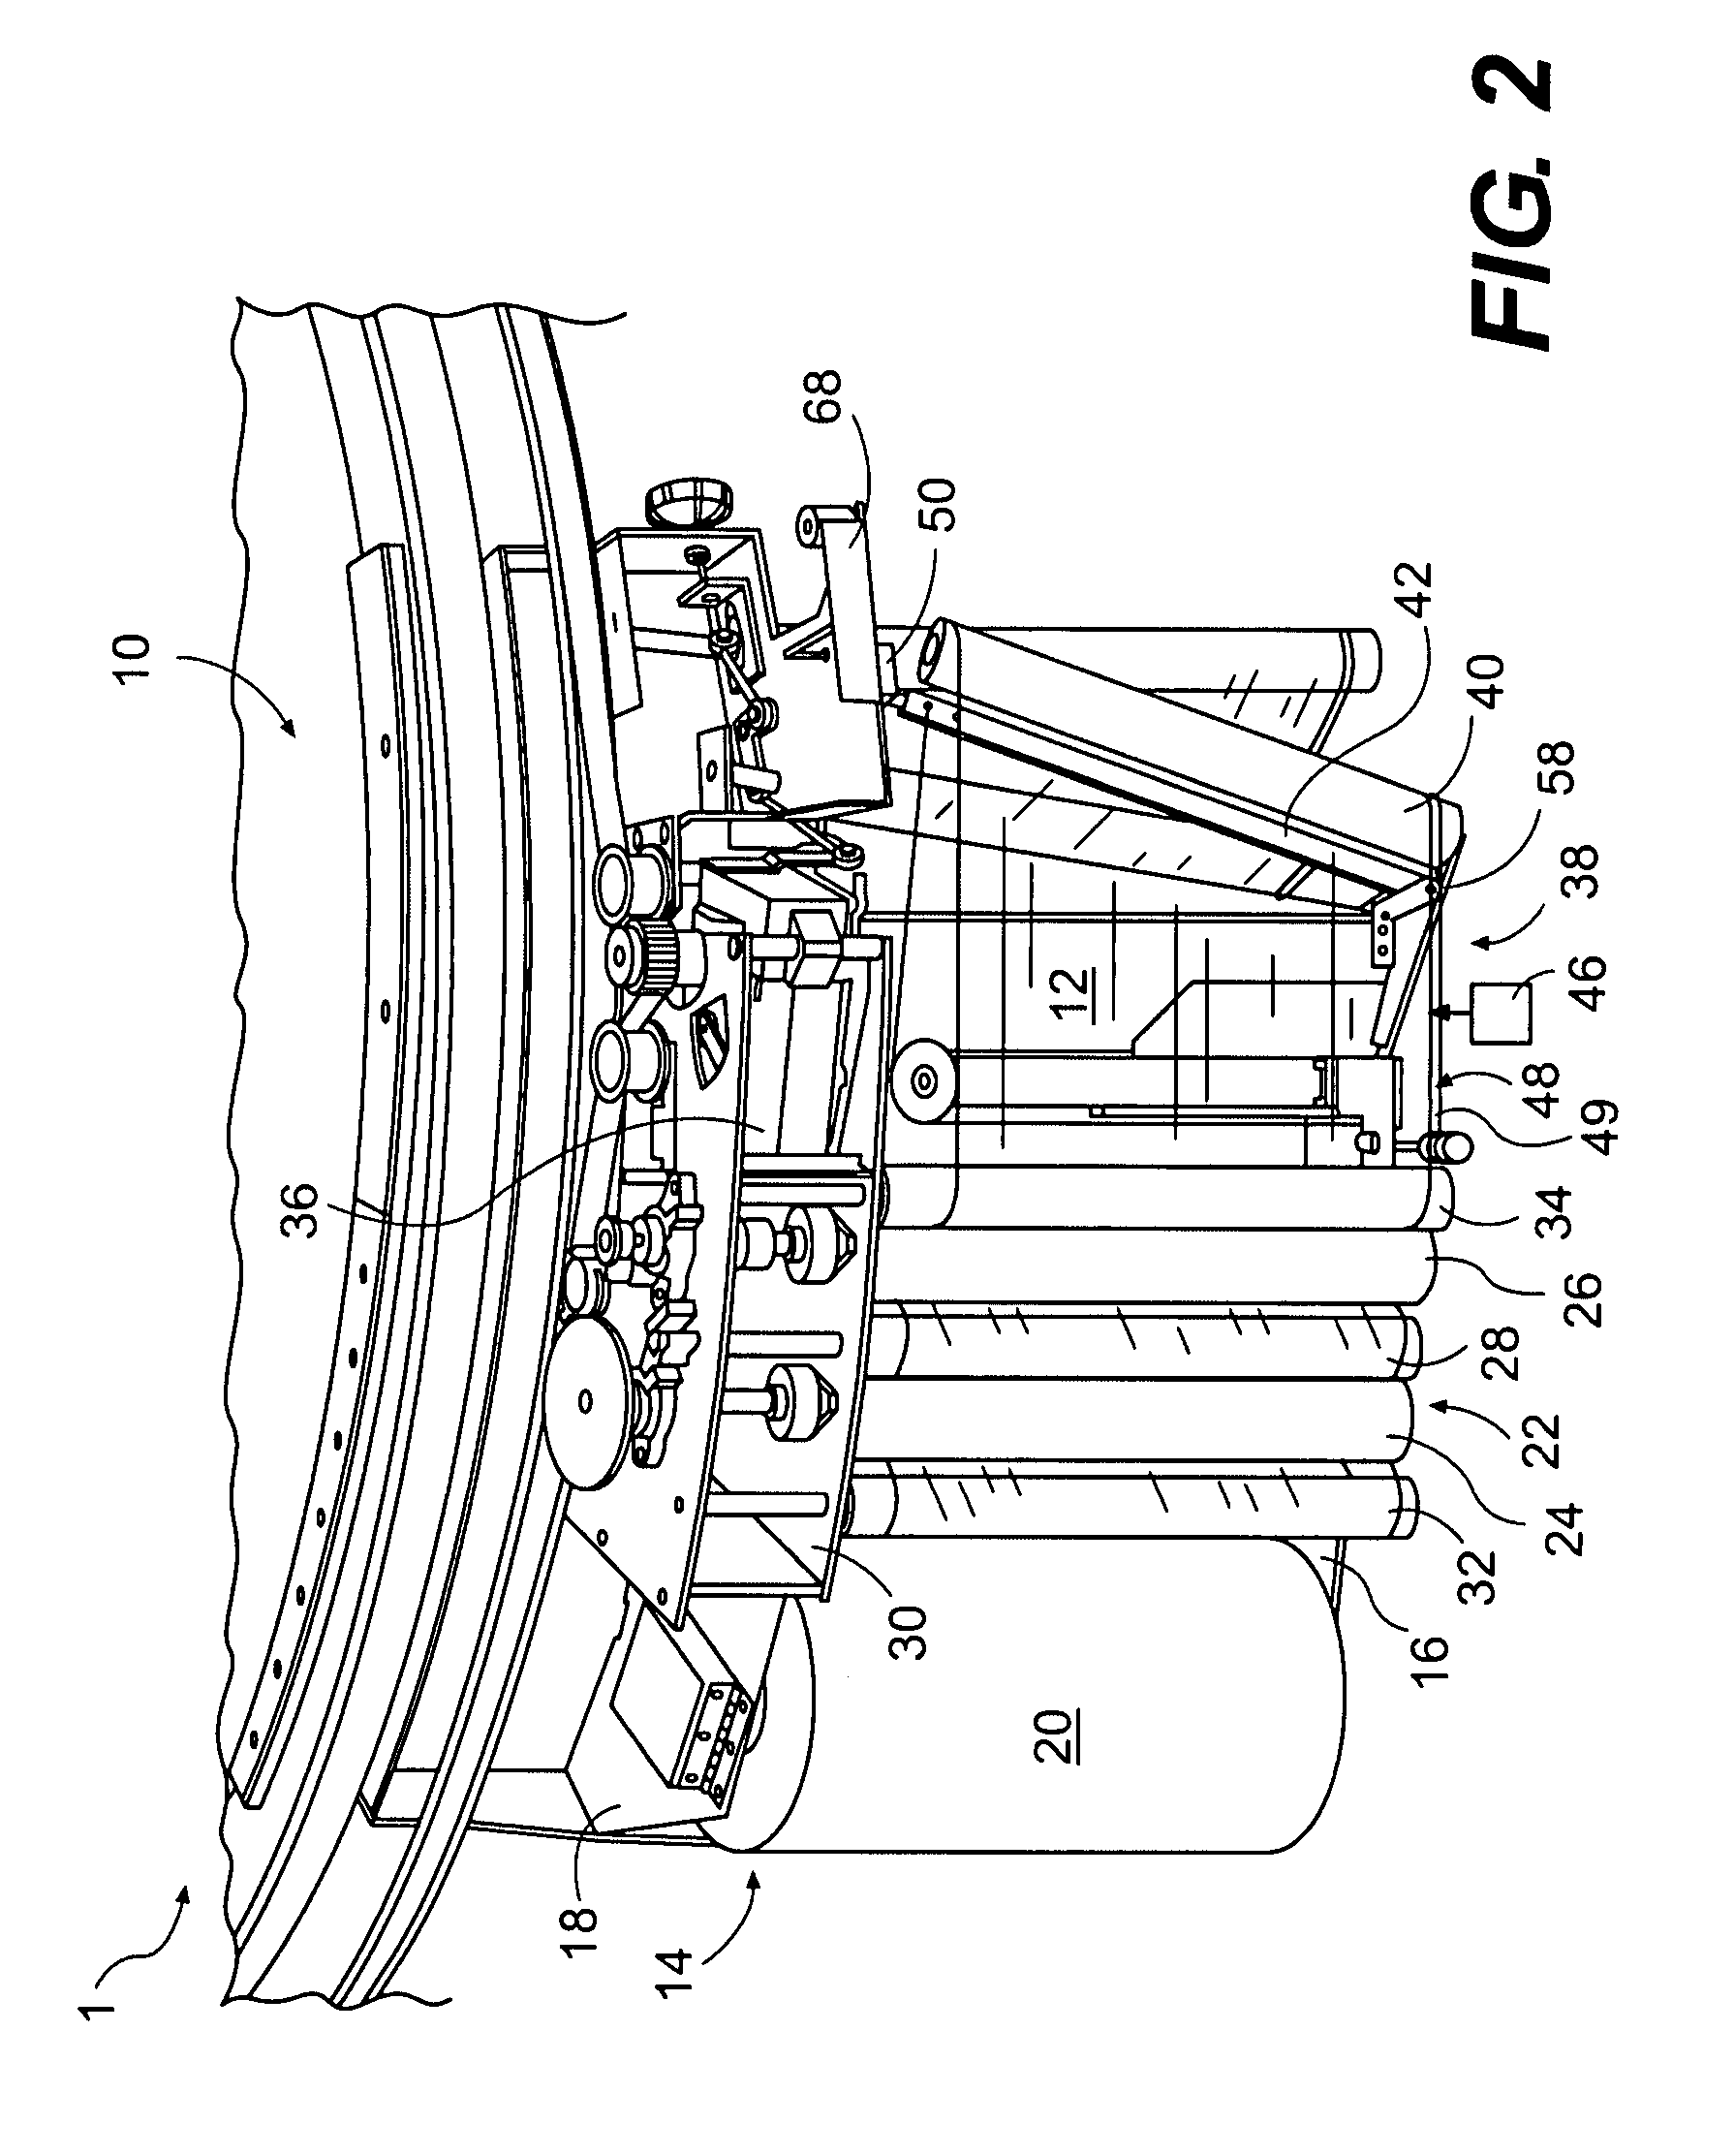 Method and apparatus for securing a load to a pallet with a roped film web